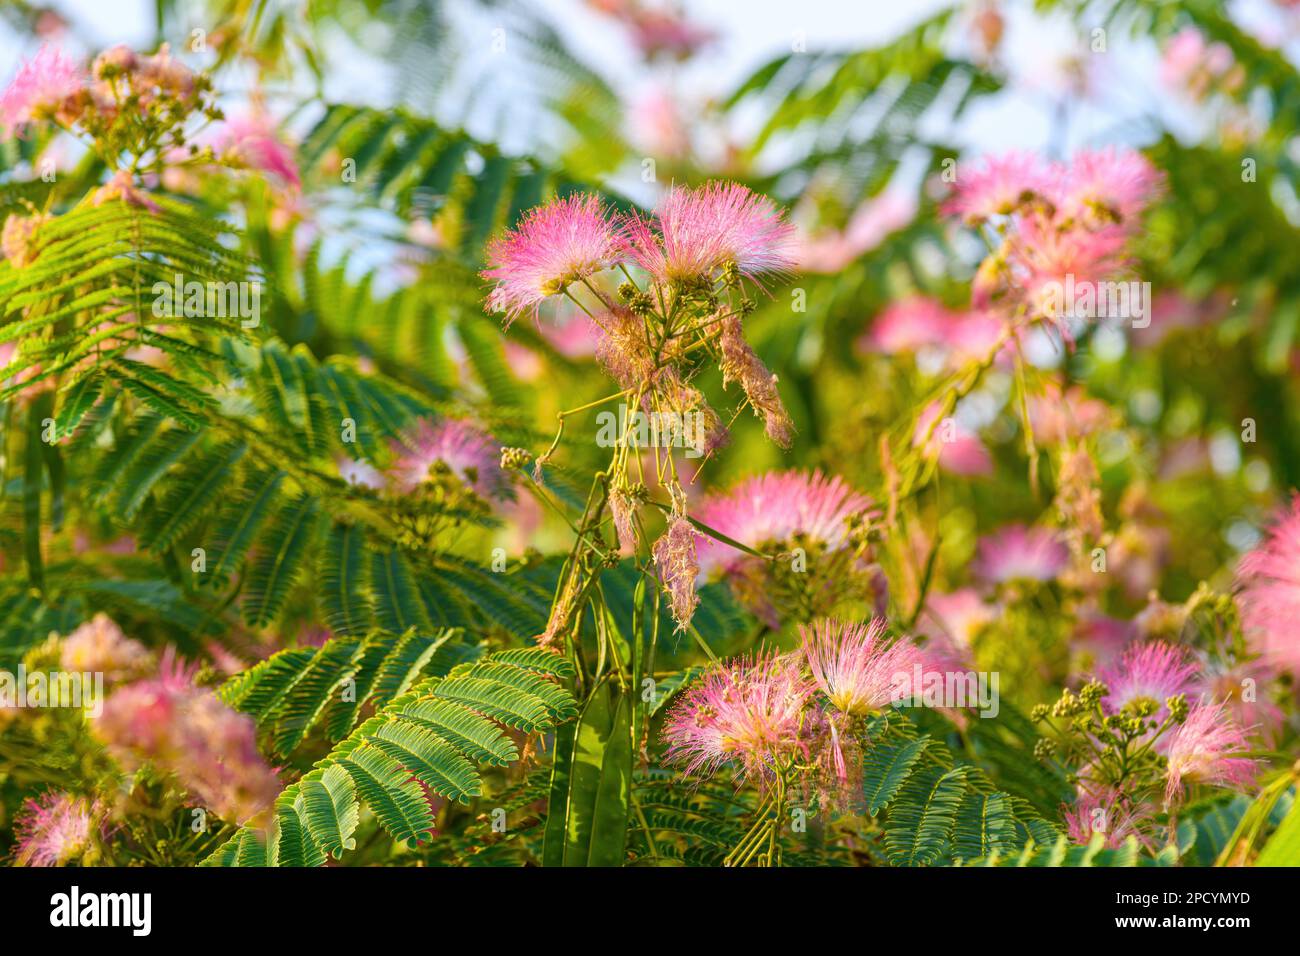 Mimosa or Persian silk tree (Albizia julibrissin) in bloom with beautiful pink flowers, selective focus Stock Photo